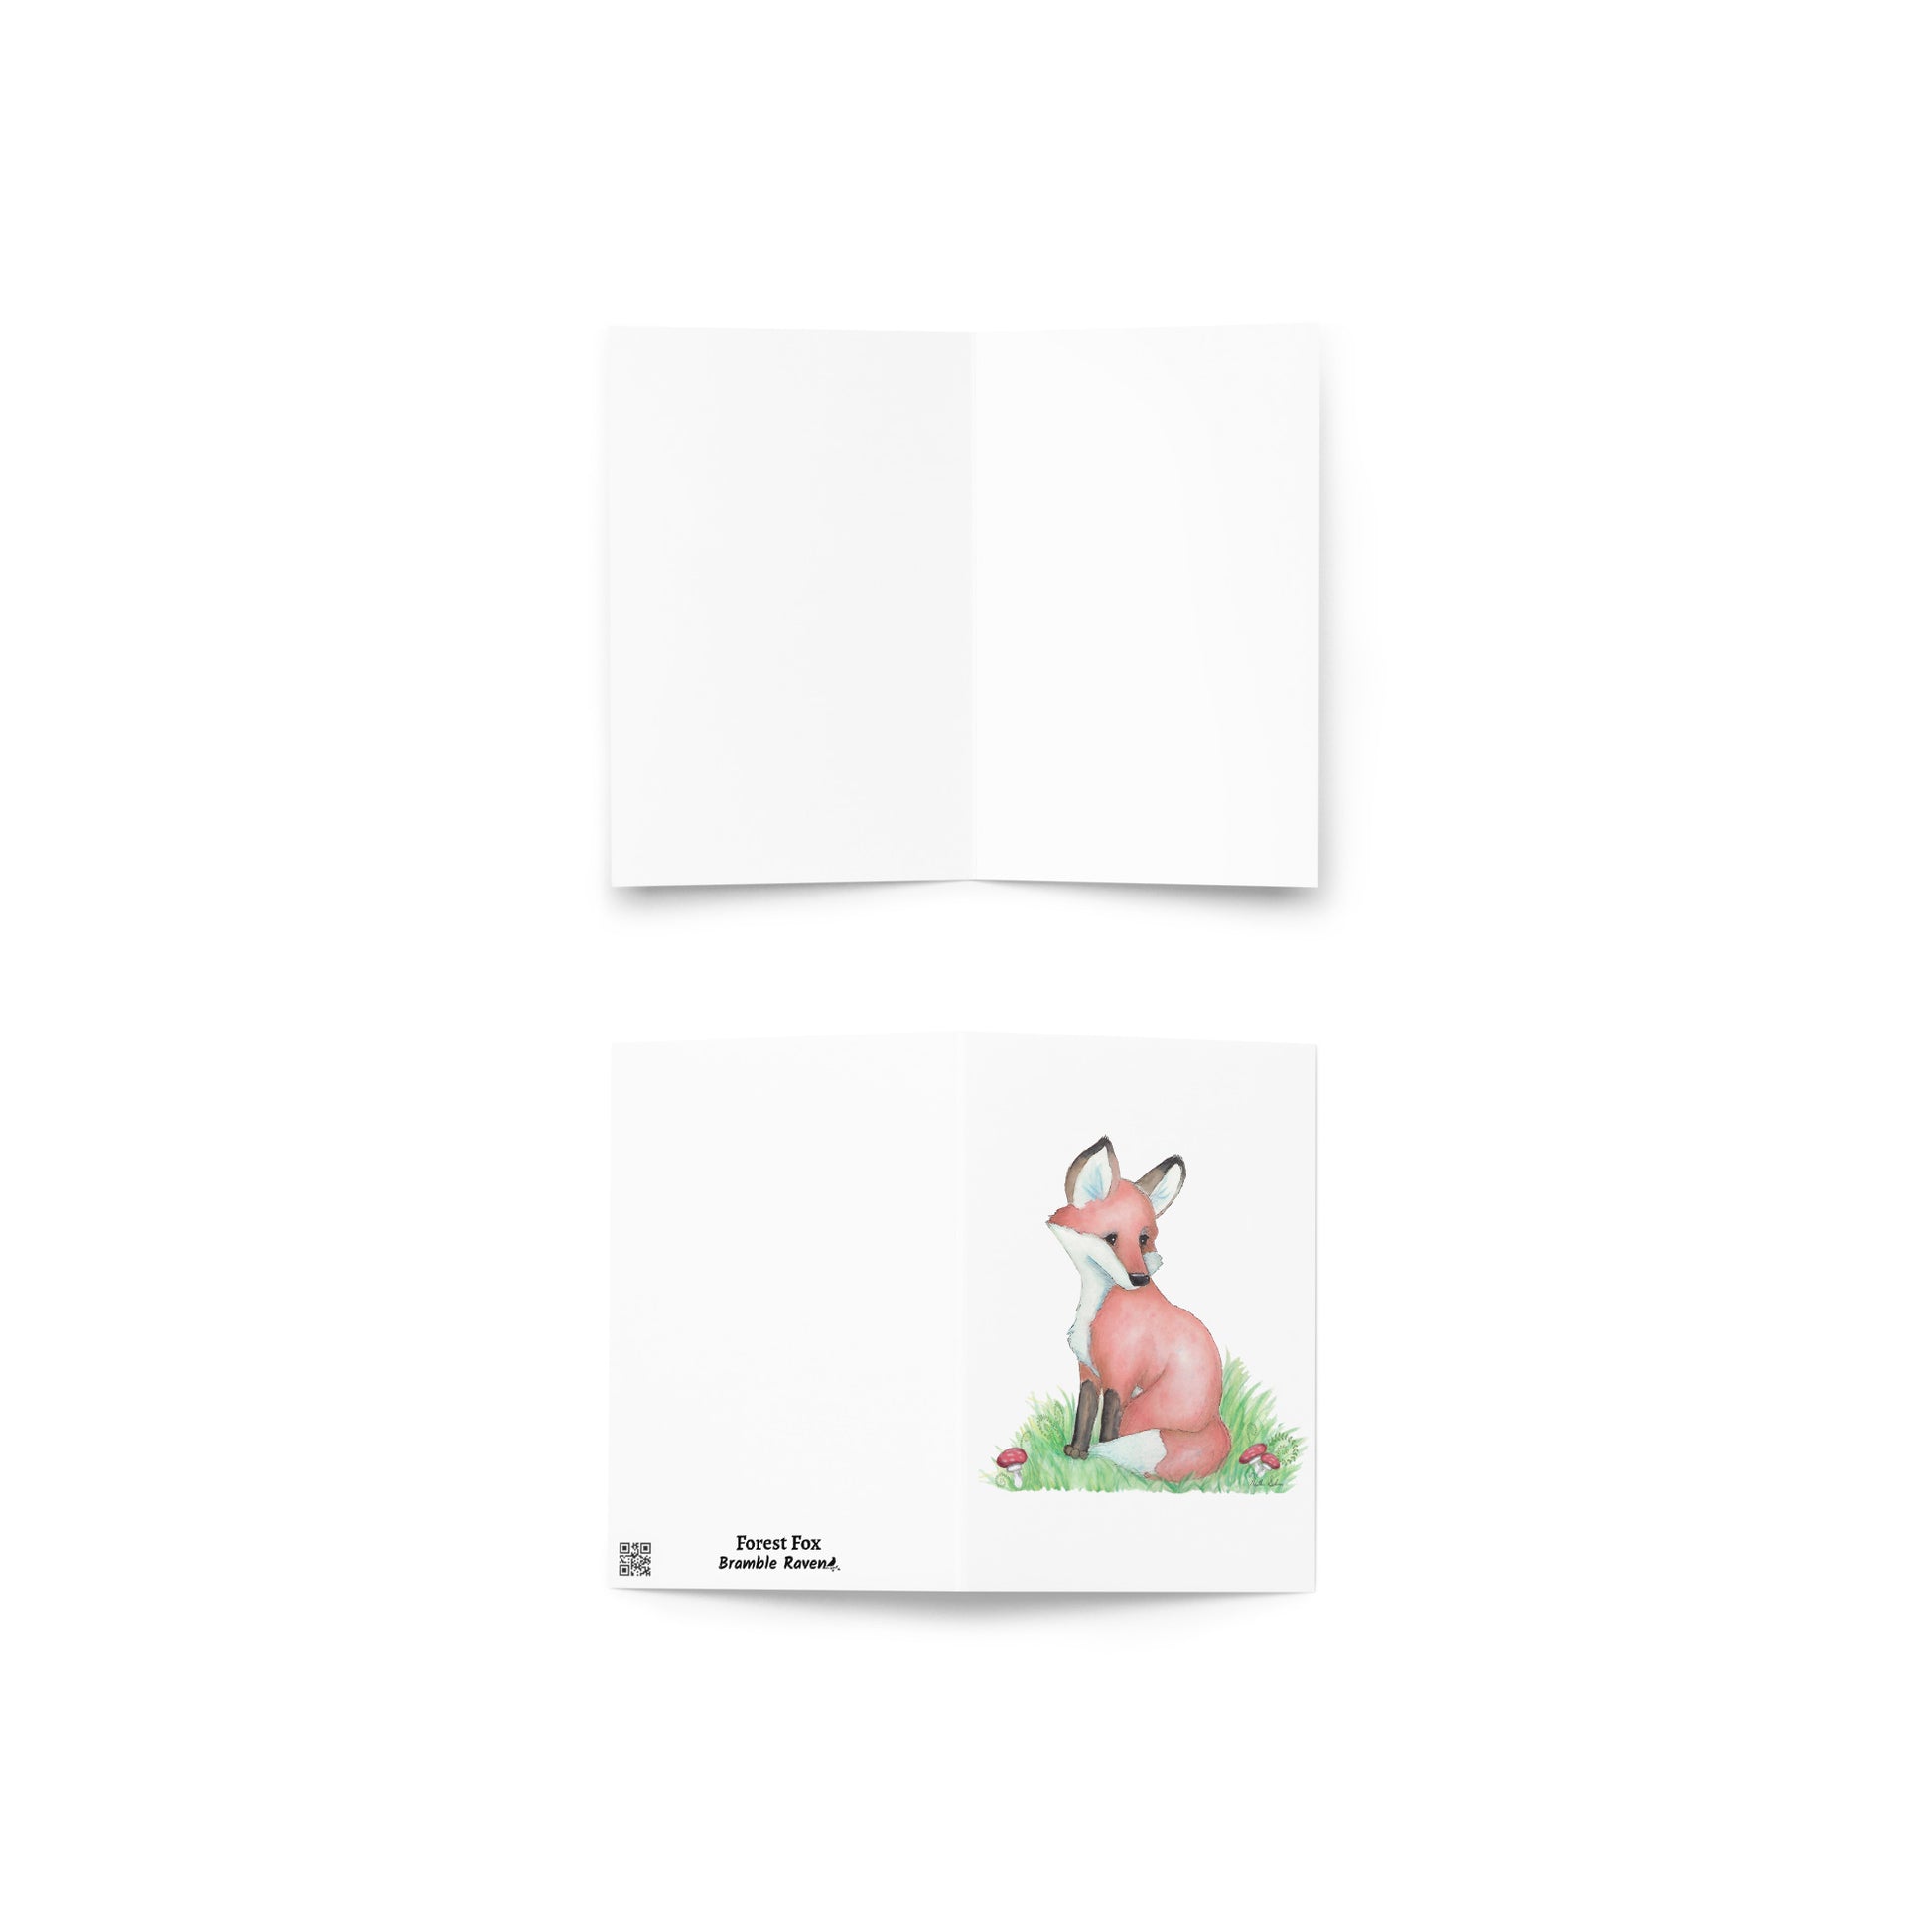 4 by 6 inch forest fox greeting card. Front has watercolor print of a fox in the grass by mushrooms and ferns. Inside is blank. Comes with a white envelope. Made of durable paperboard with vibrant printing. Shows front and back cover, and blank inside.